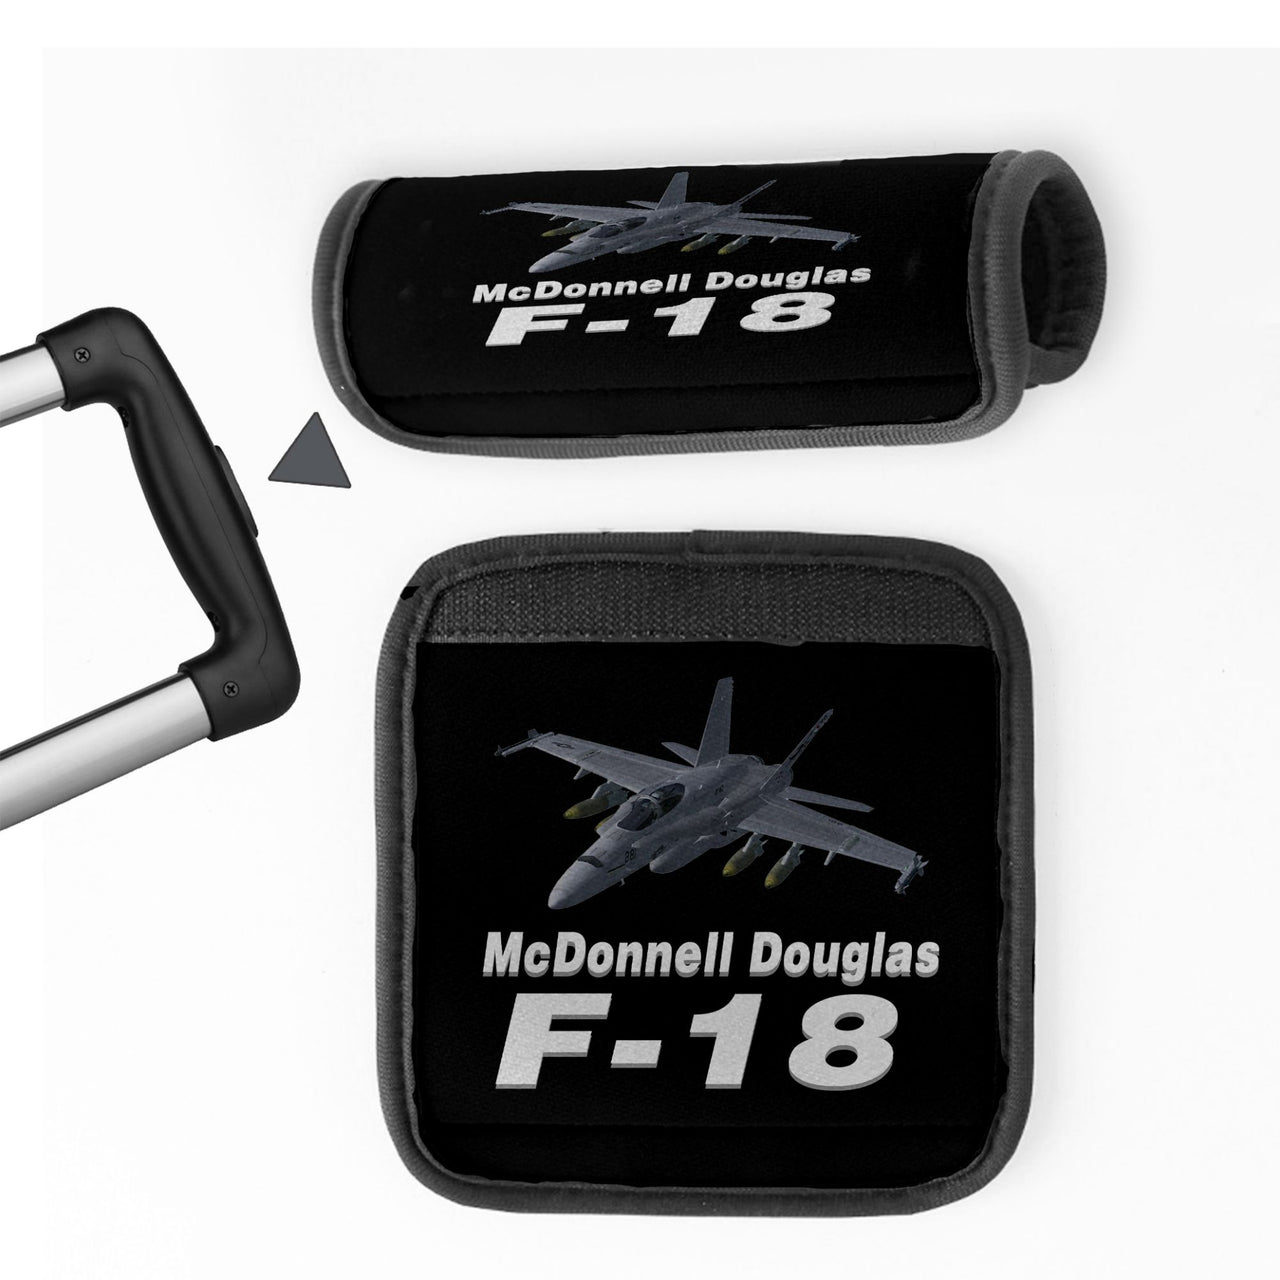 The McDonnell Douglas F18 Designed Neoprene Luggage Handle Covers